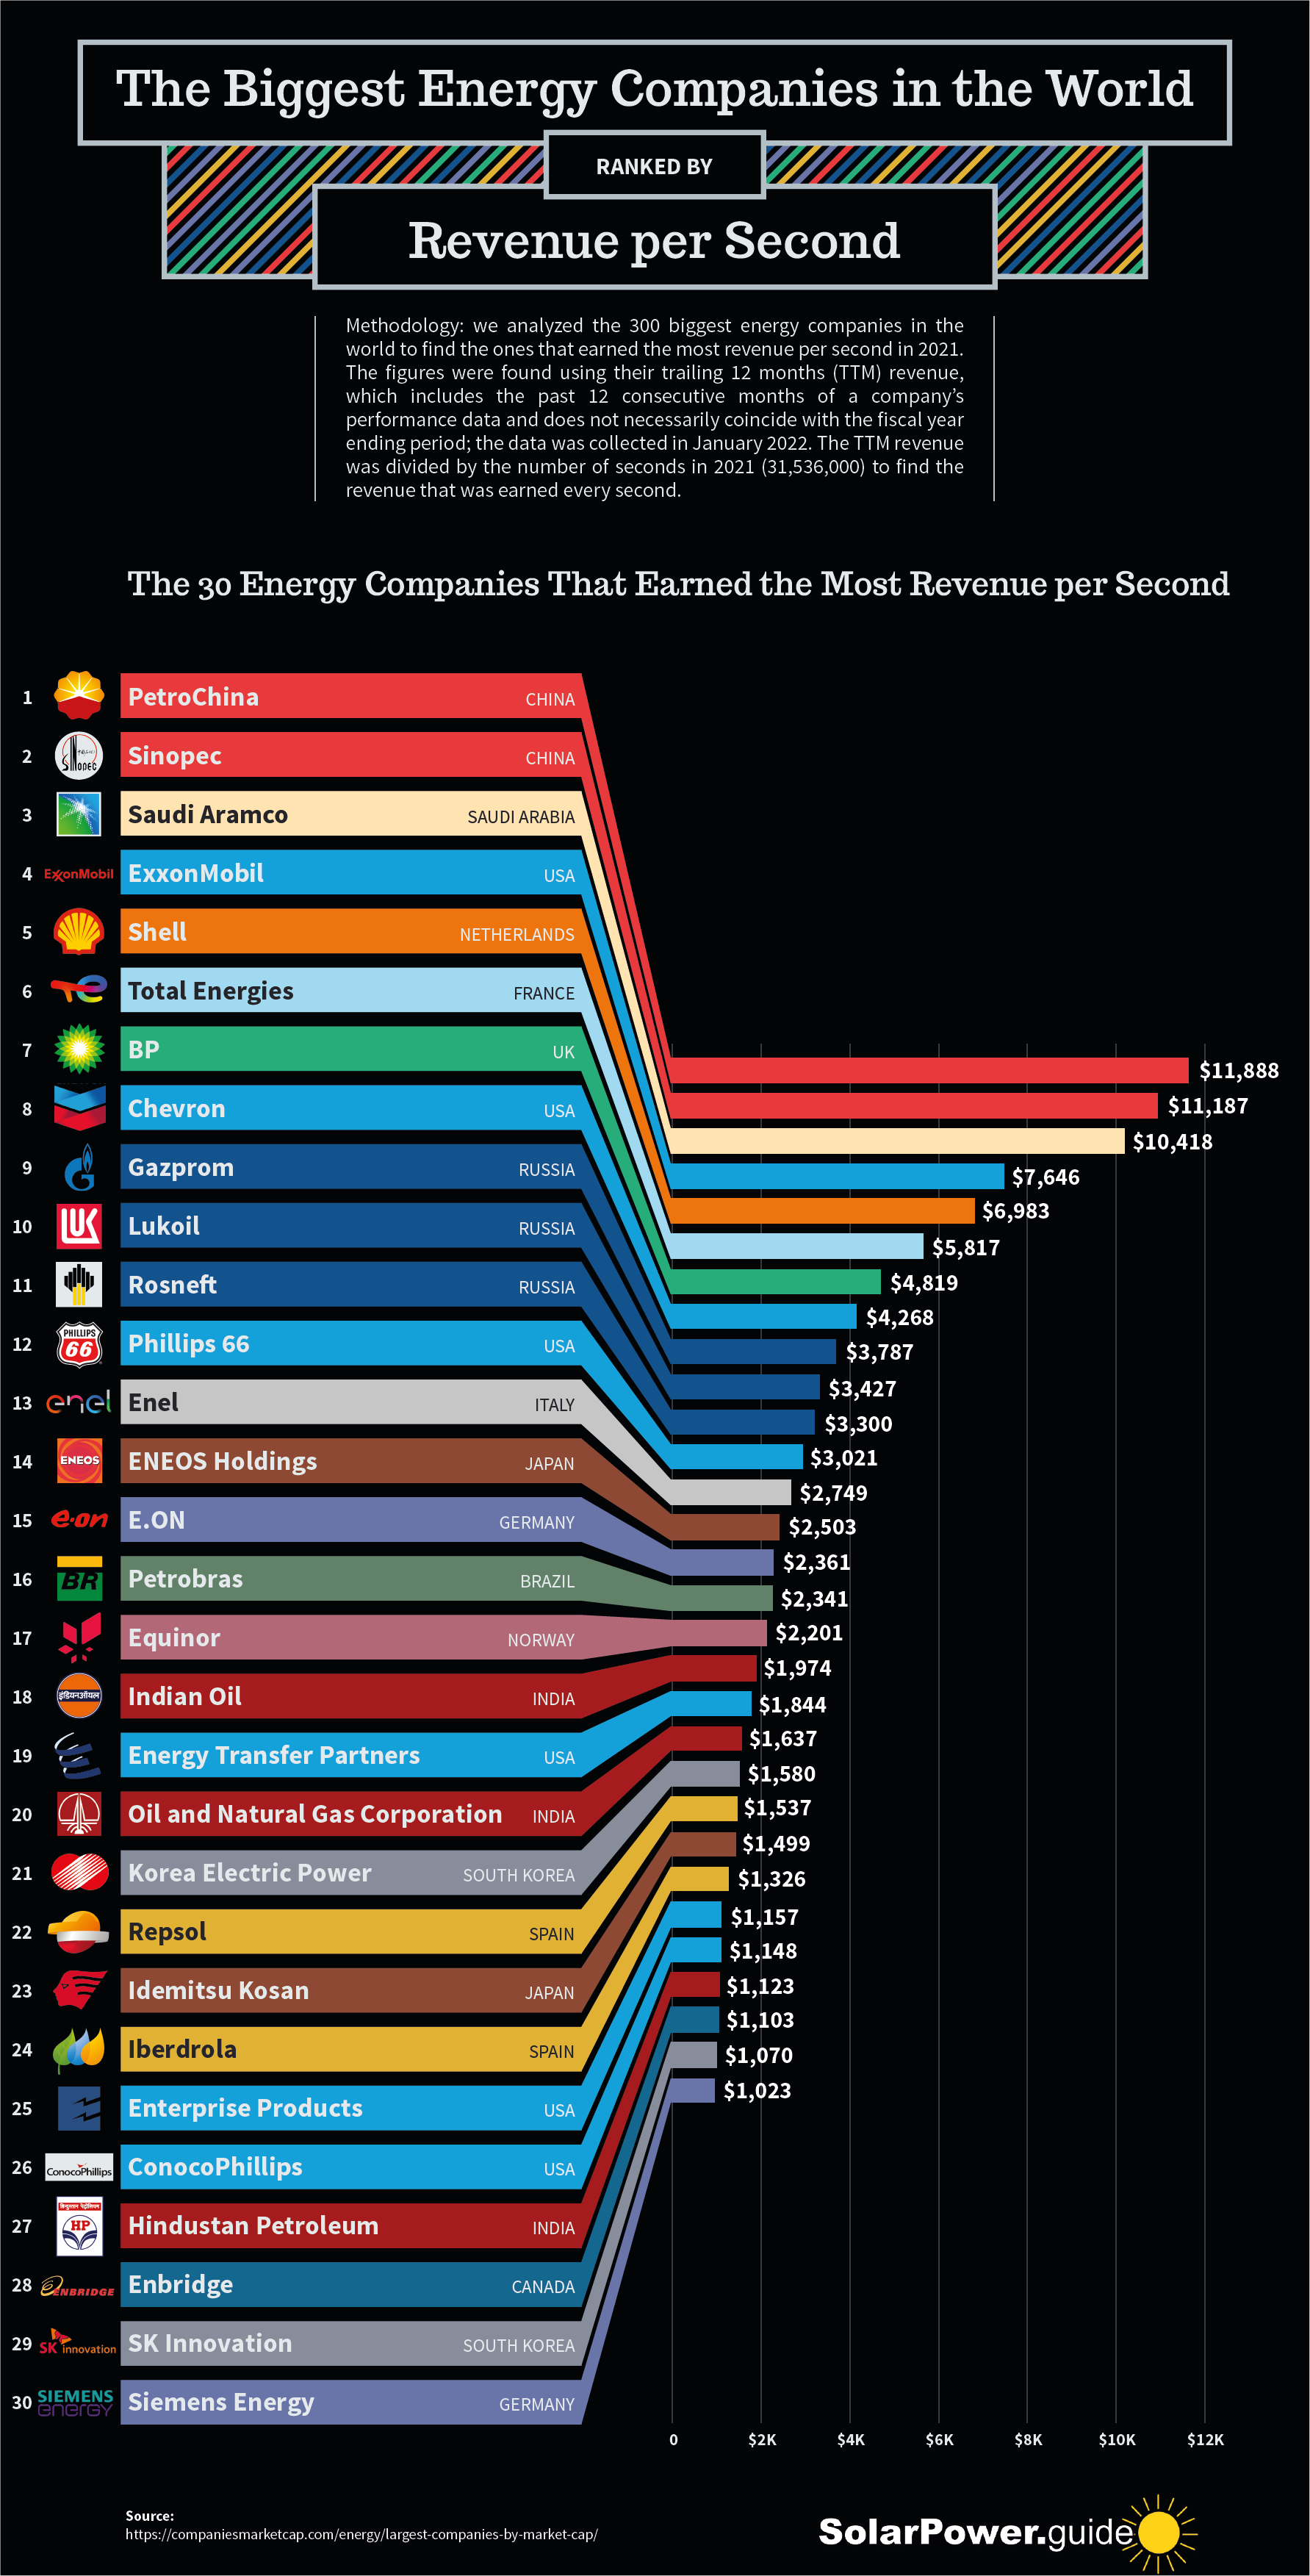 The Biggest Energy Companies in the World Ranked by Revenue per Second - Solar Power Guide Solar Energy Information - Infographic